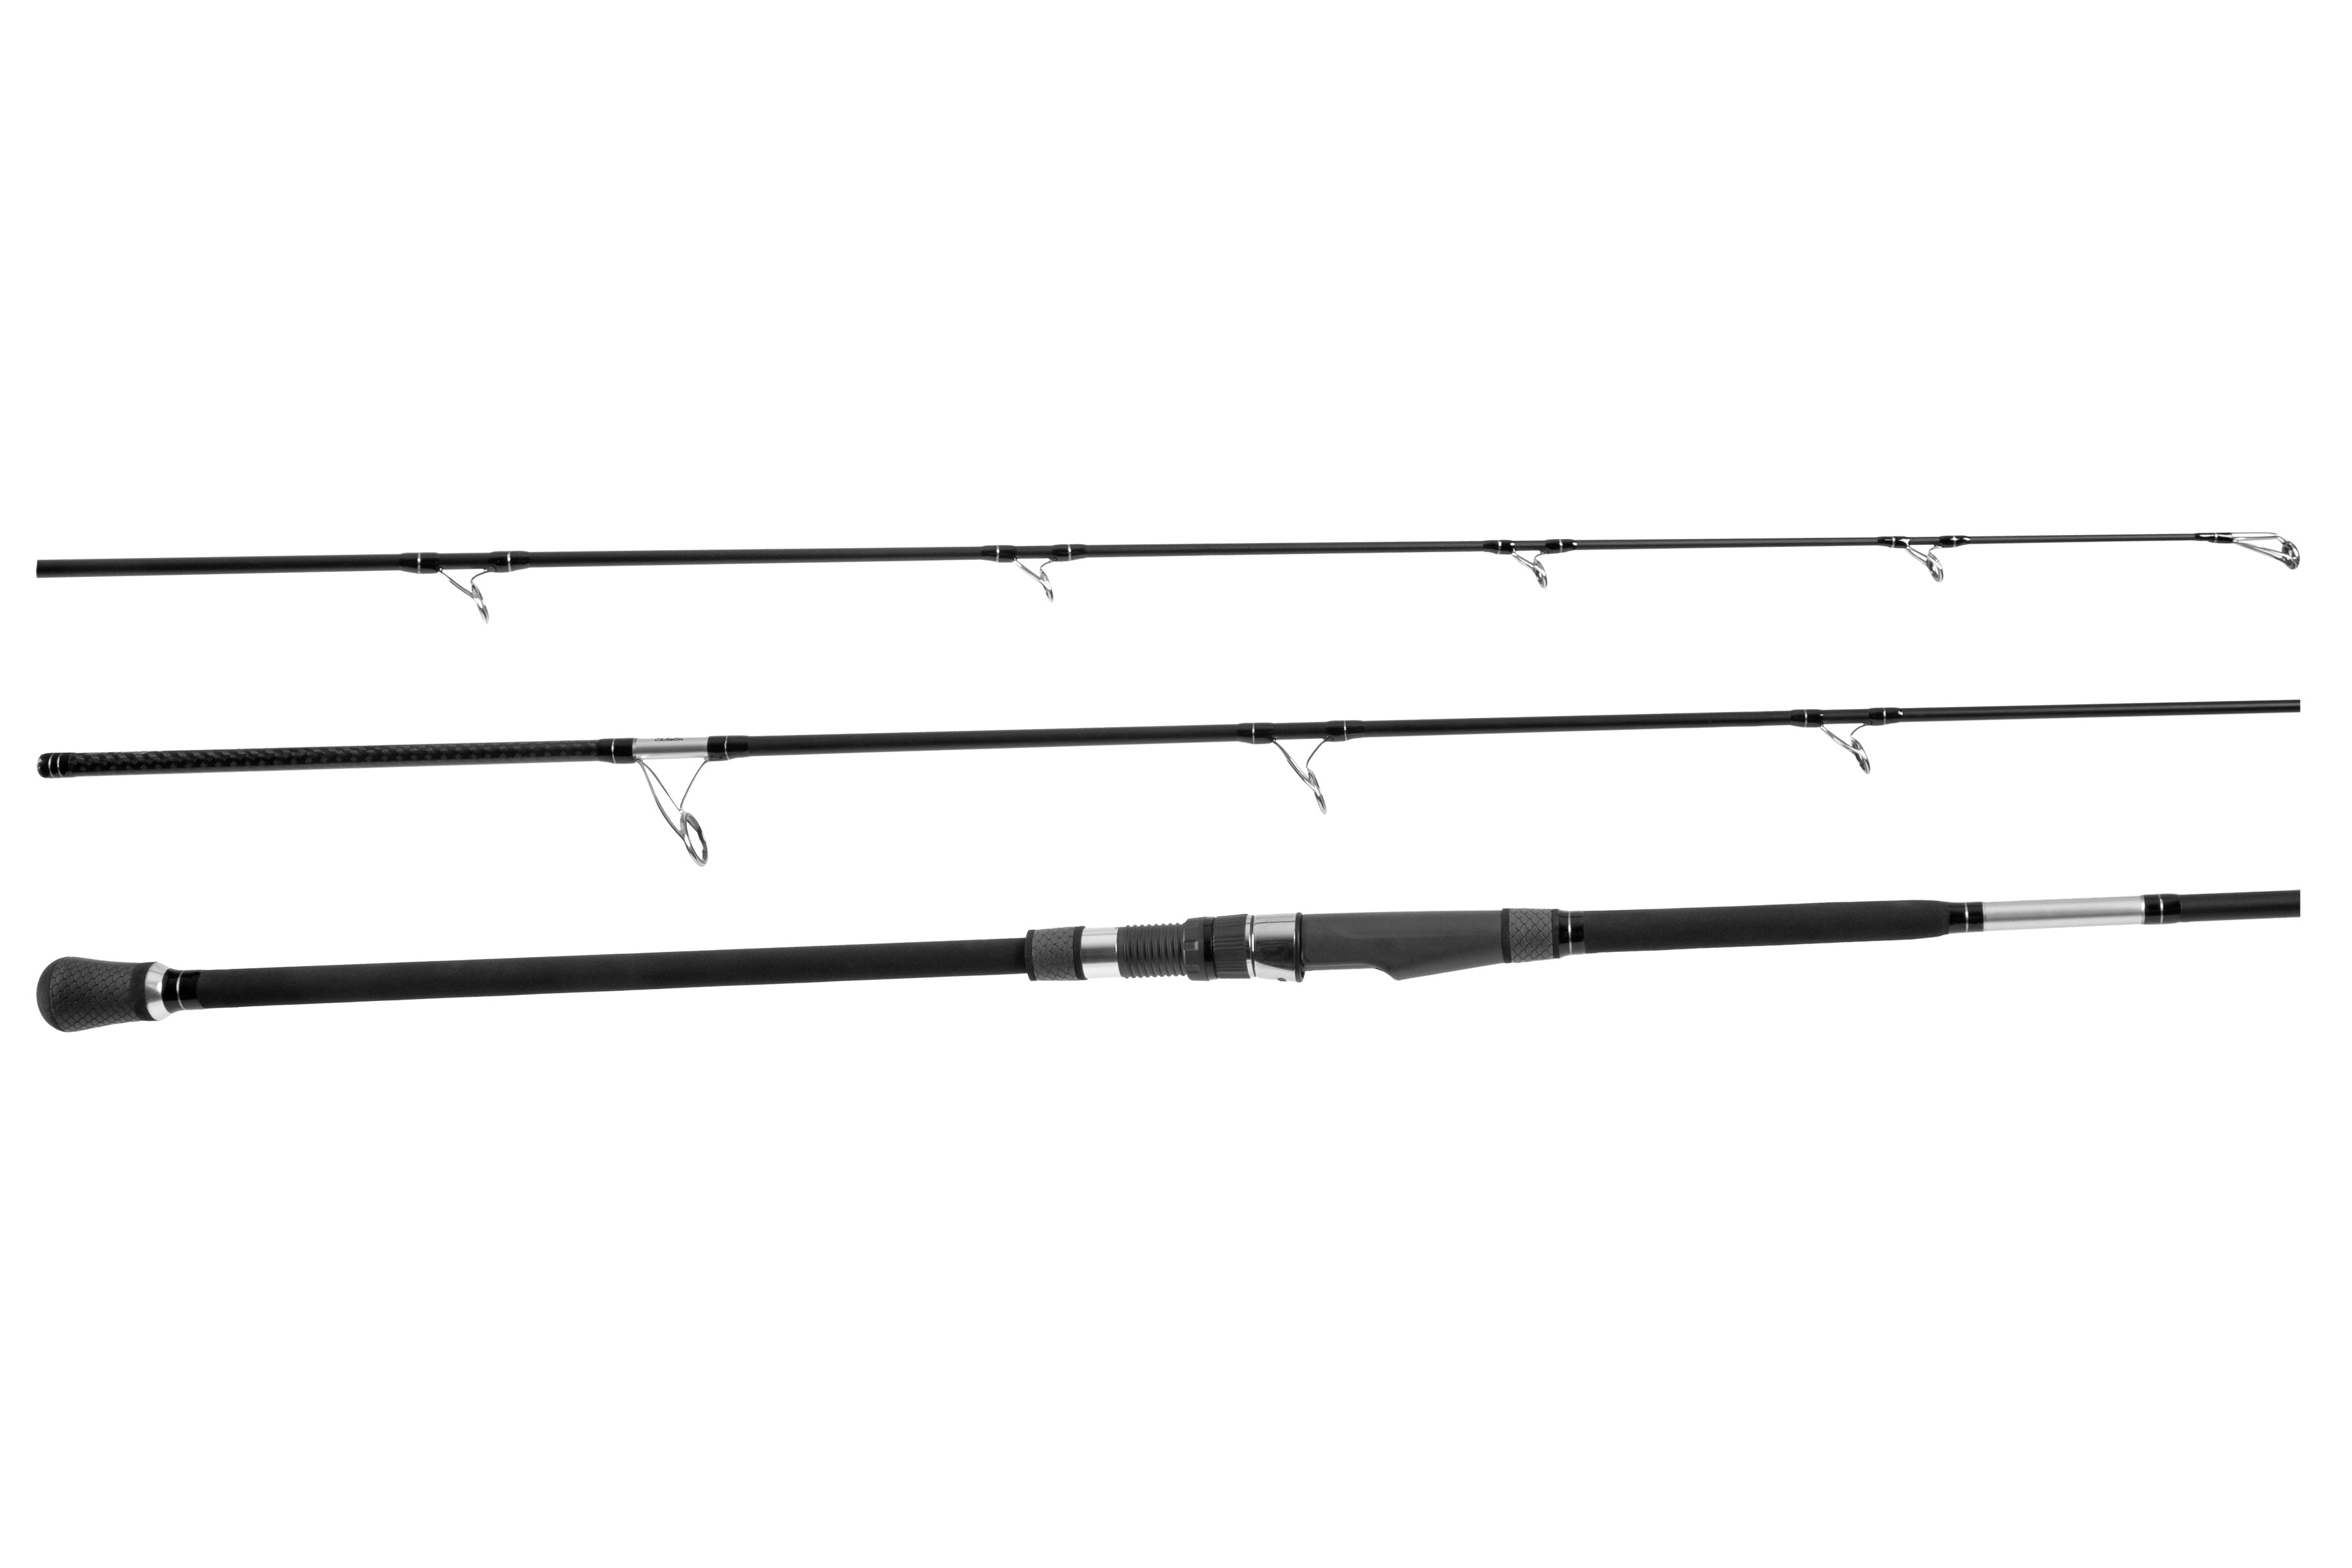  EVTSCAN 11 to 19 Inch Extendable Surf Fishing Sand